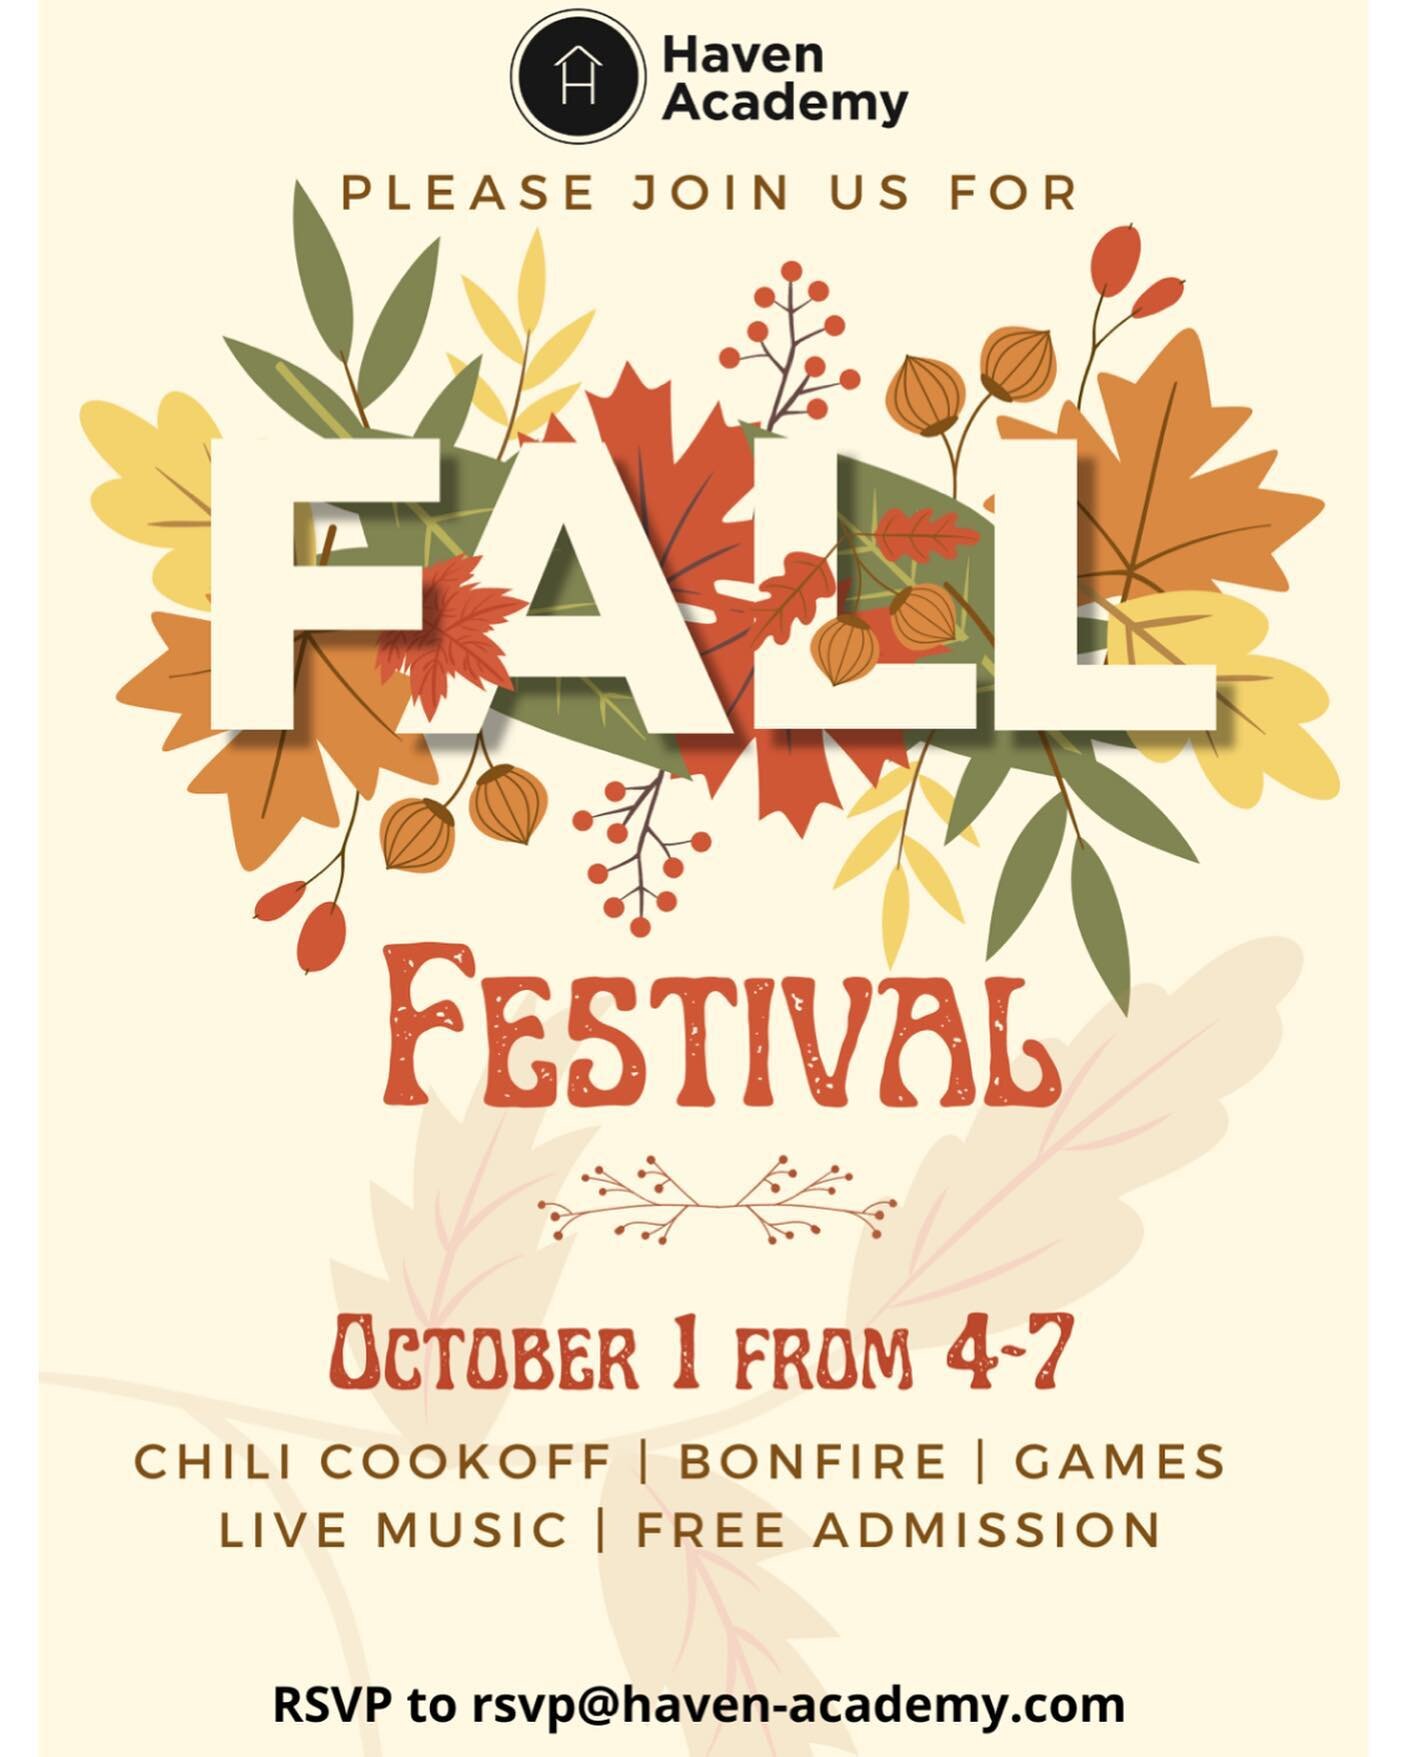 Please join us for our Fall Festival on October 1 from 4-7 🎃 EVERYONE is welcome!🤍 

We will have live music featuring @anthonymichaelmusic, inflatable obstacle course, bonfire with s&rsquo;mores, football on TV&rsquo;s, face painting, lawn games, 